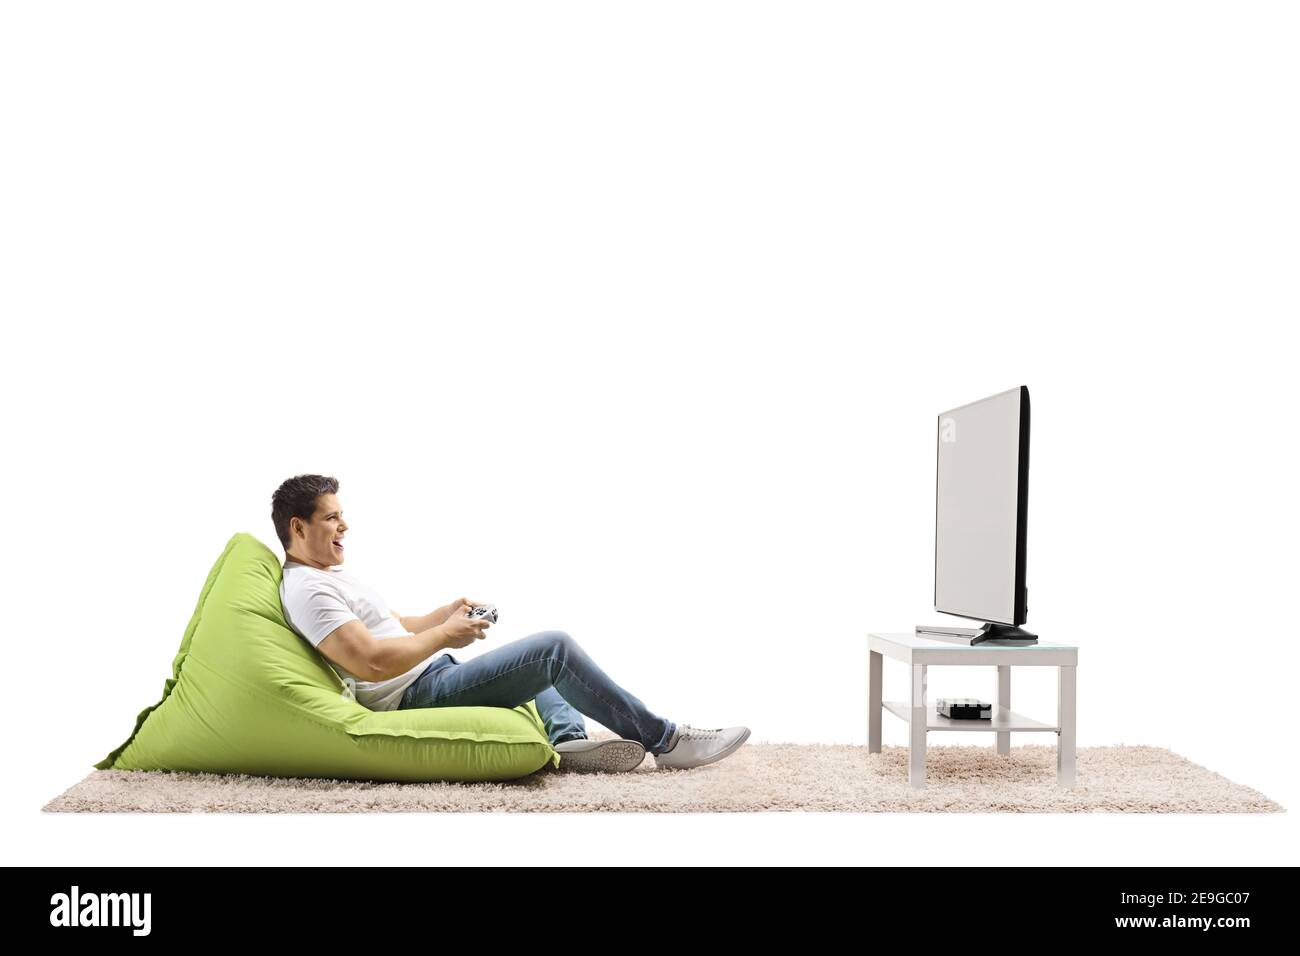 Young man sitting on a green bean bag and playing video games with a joystick at home in a living room Stock Photo